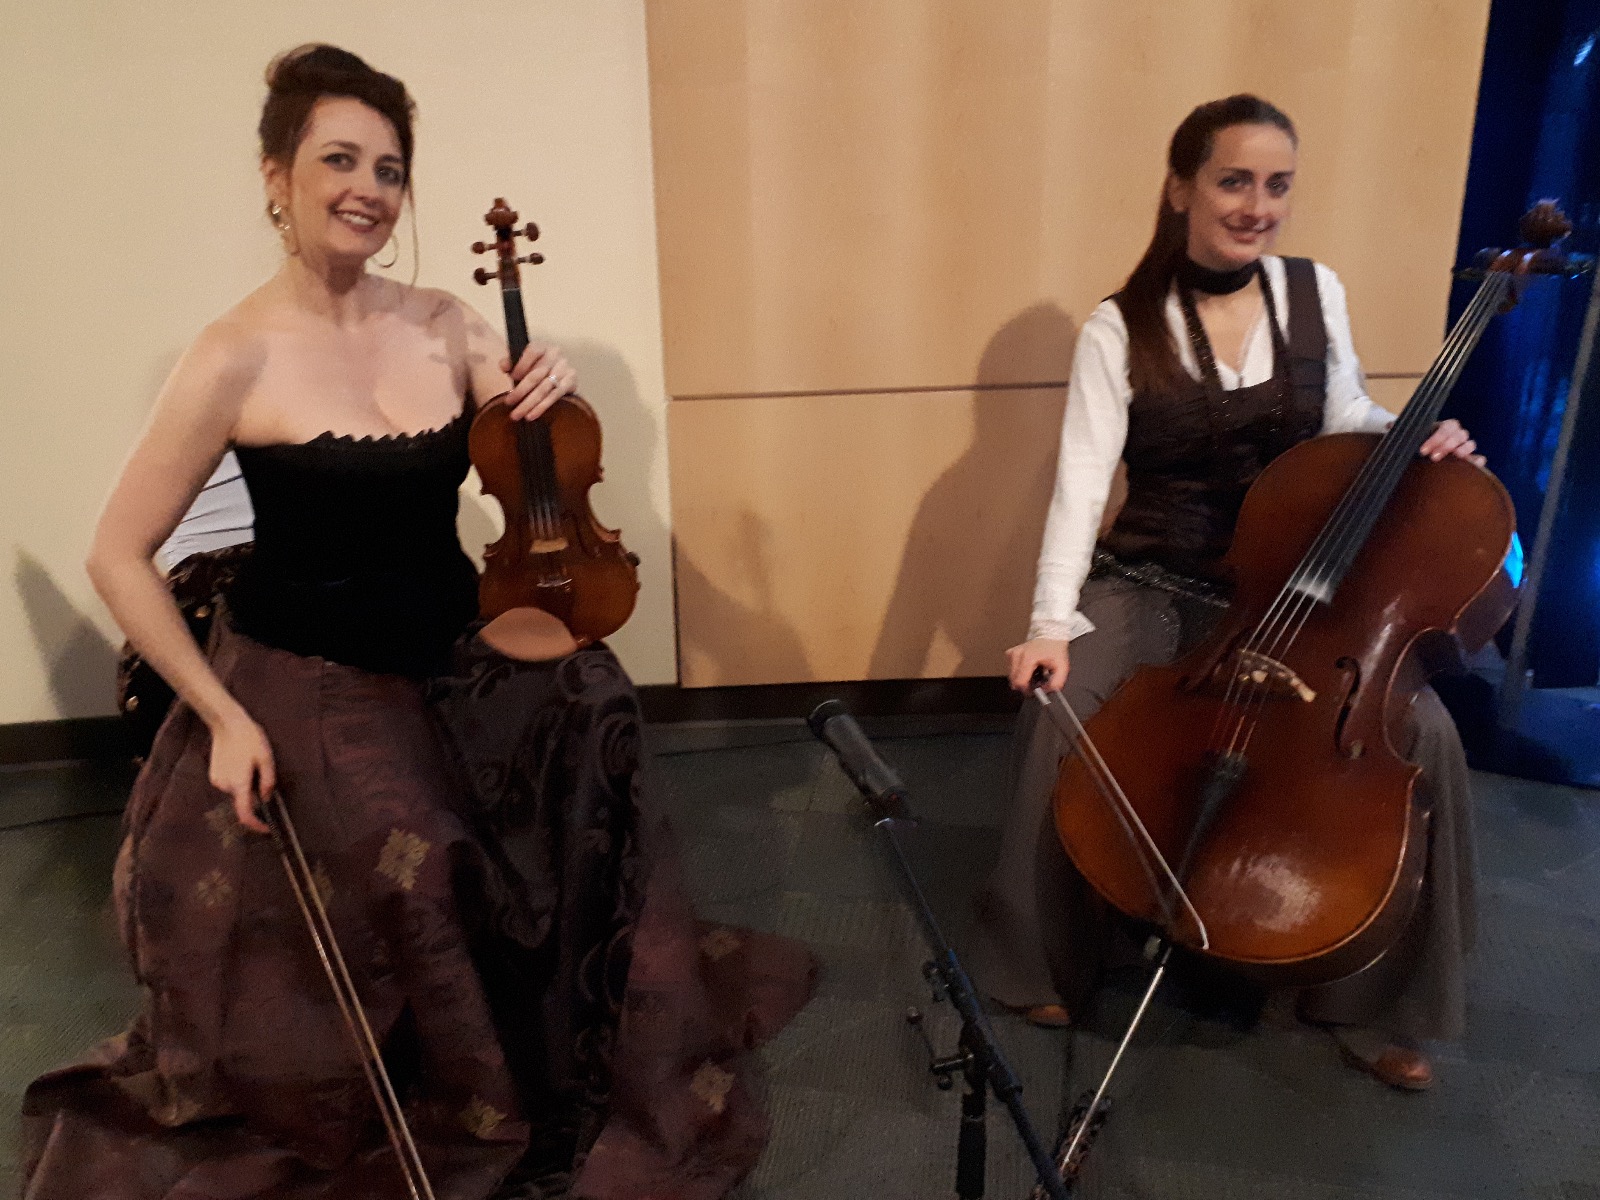 Rhiannon in a big brown skirt and corset and Laure in a similar pirate costume with their violin and cello